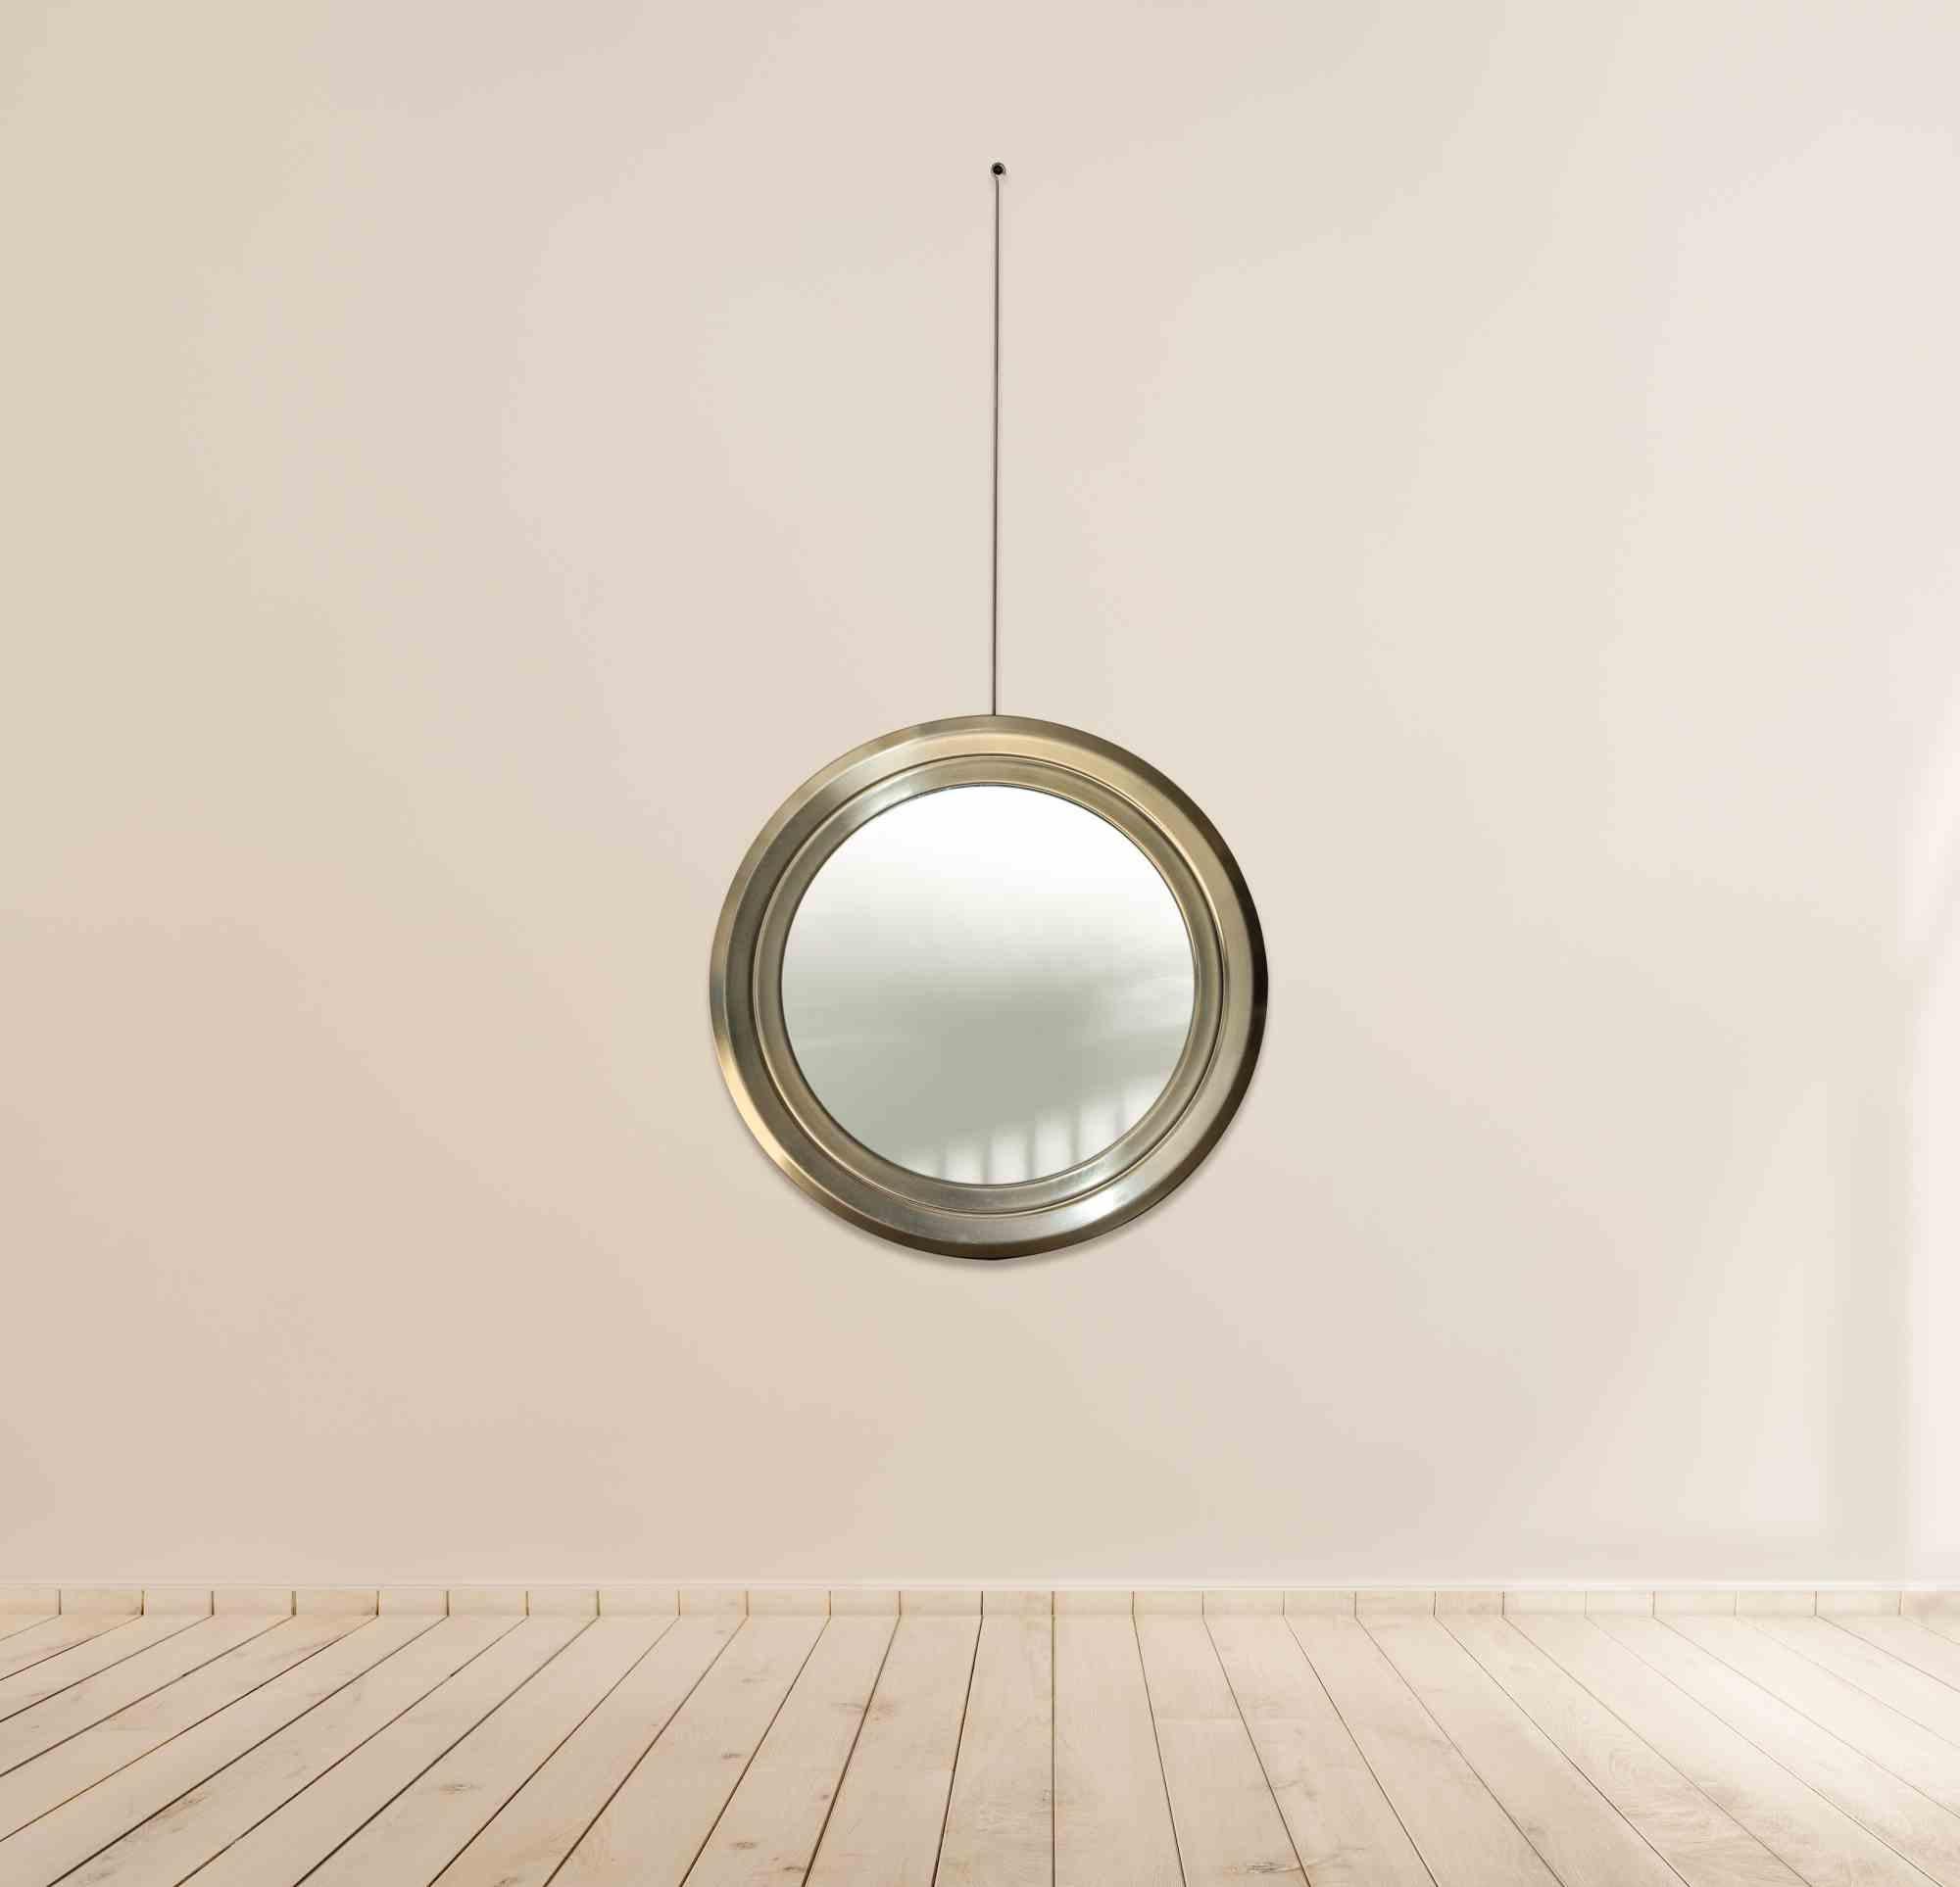 Vintage wall mirror is an original design object realized in 1970s by Gianni Moscatelli

Manufactured for Formanova, Italy 

Give a touch of elegance to your room with this amazing mirror.